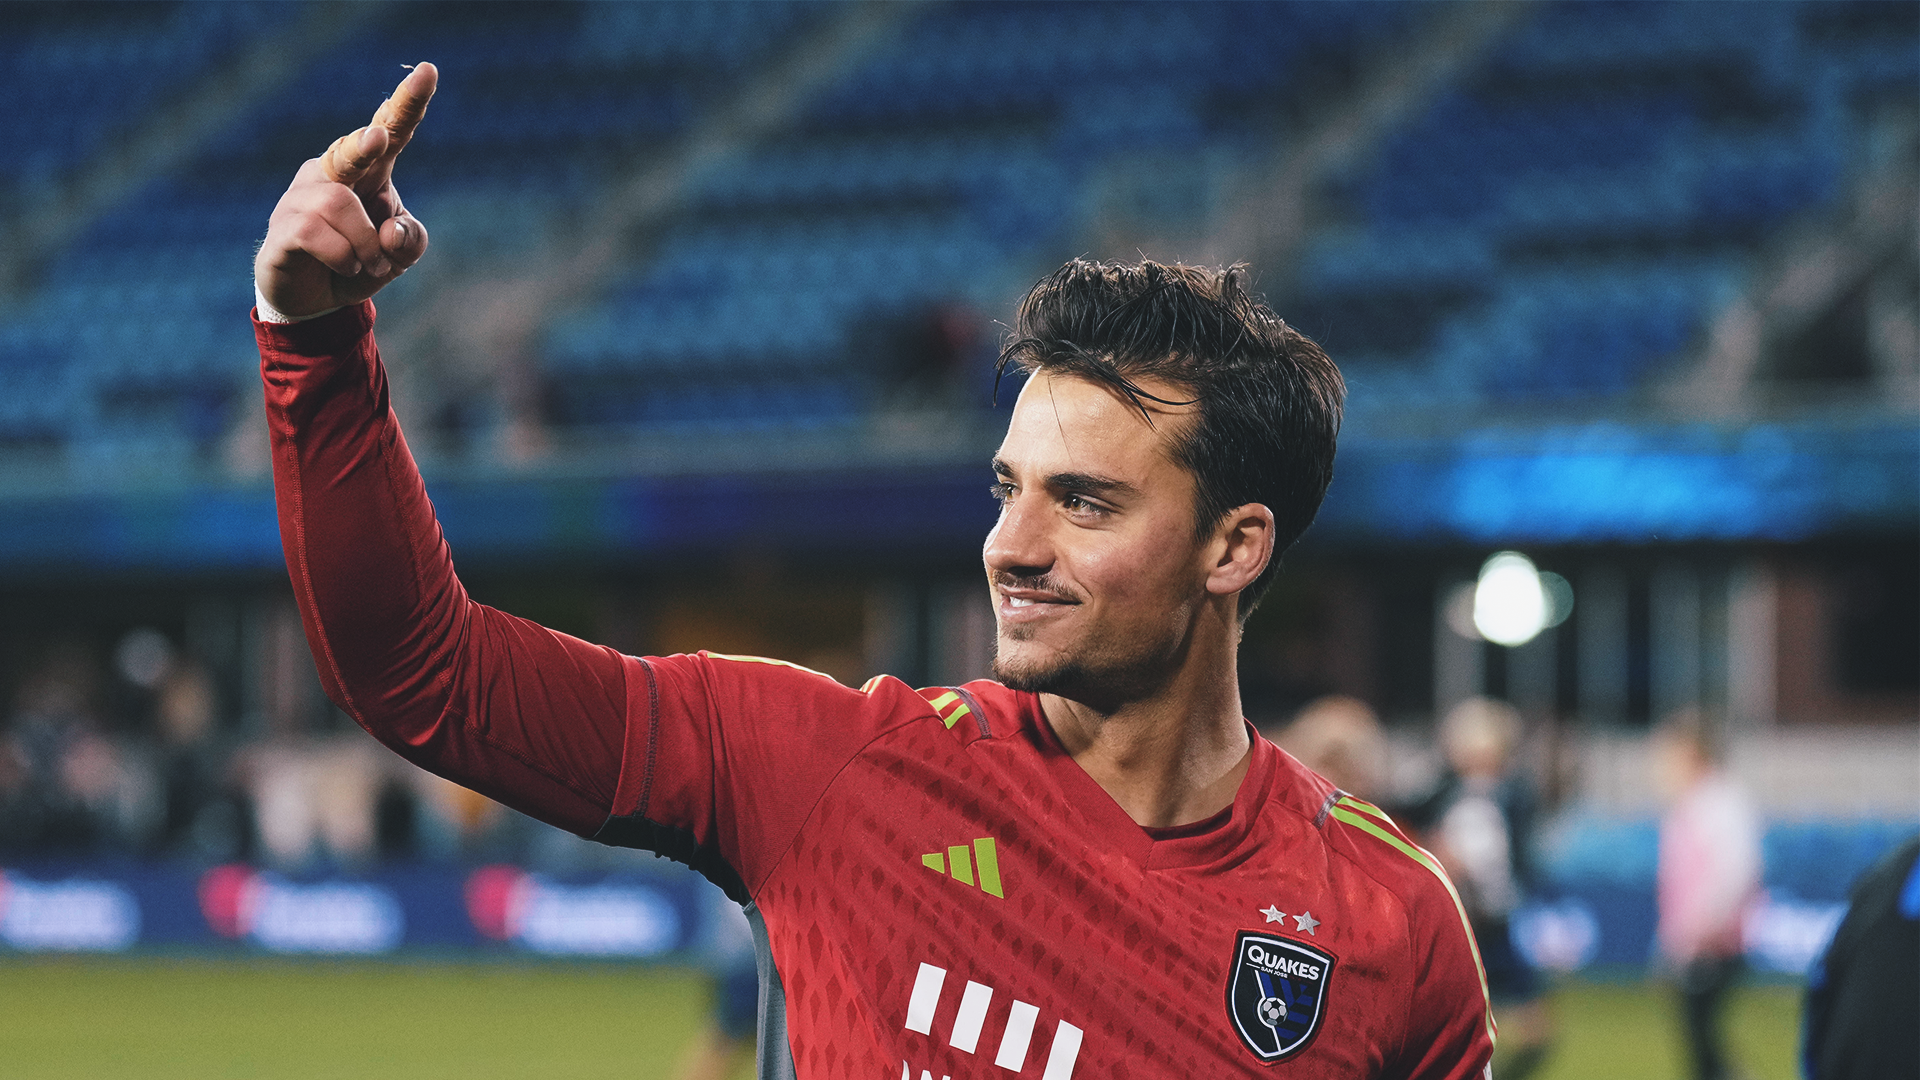 NEWS: Earthquakes Goalkeeper JT Marcinkowski Undergoes Successful Surgery  to Repair Right Knee